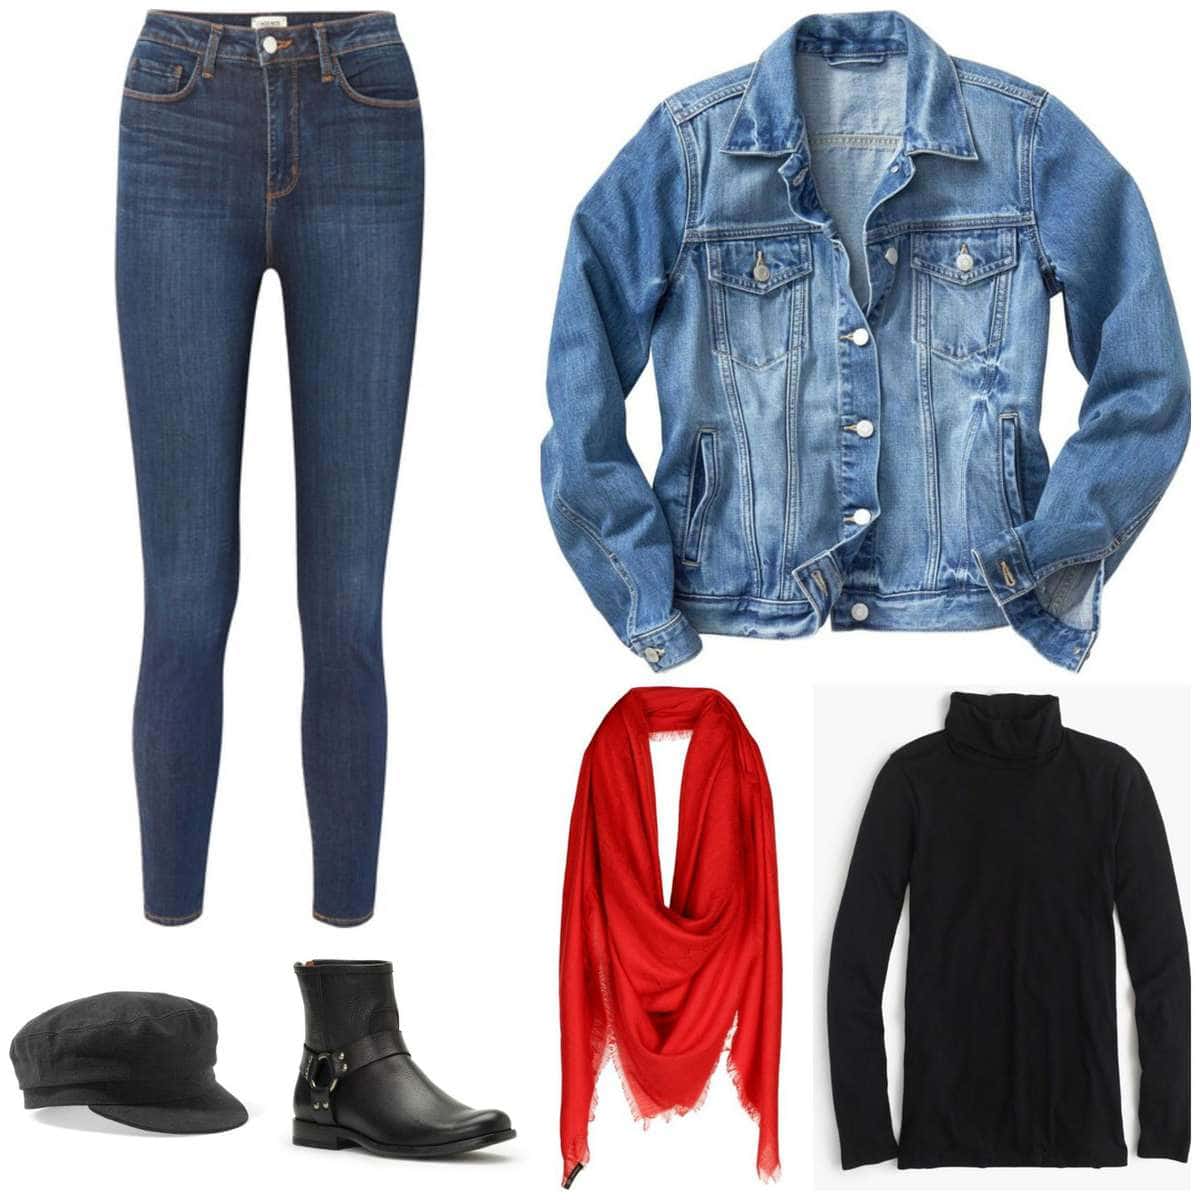 Casual work from home style featuring leggings, a Madewell denim jacket, layering turtleneck, baker boy cap, black harness boots, and a red passim scarf looped around the neck.